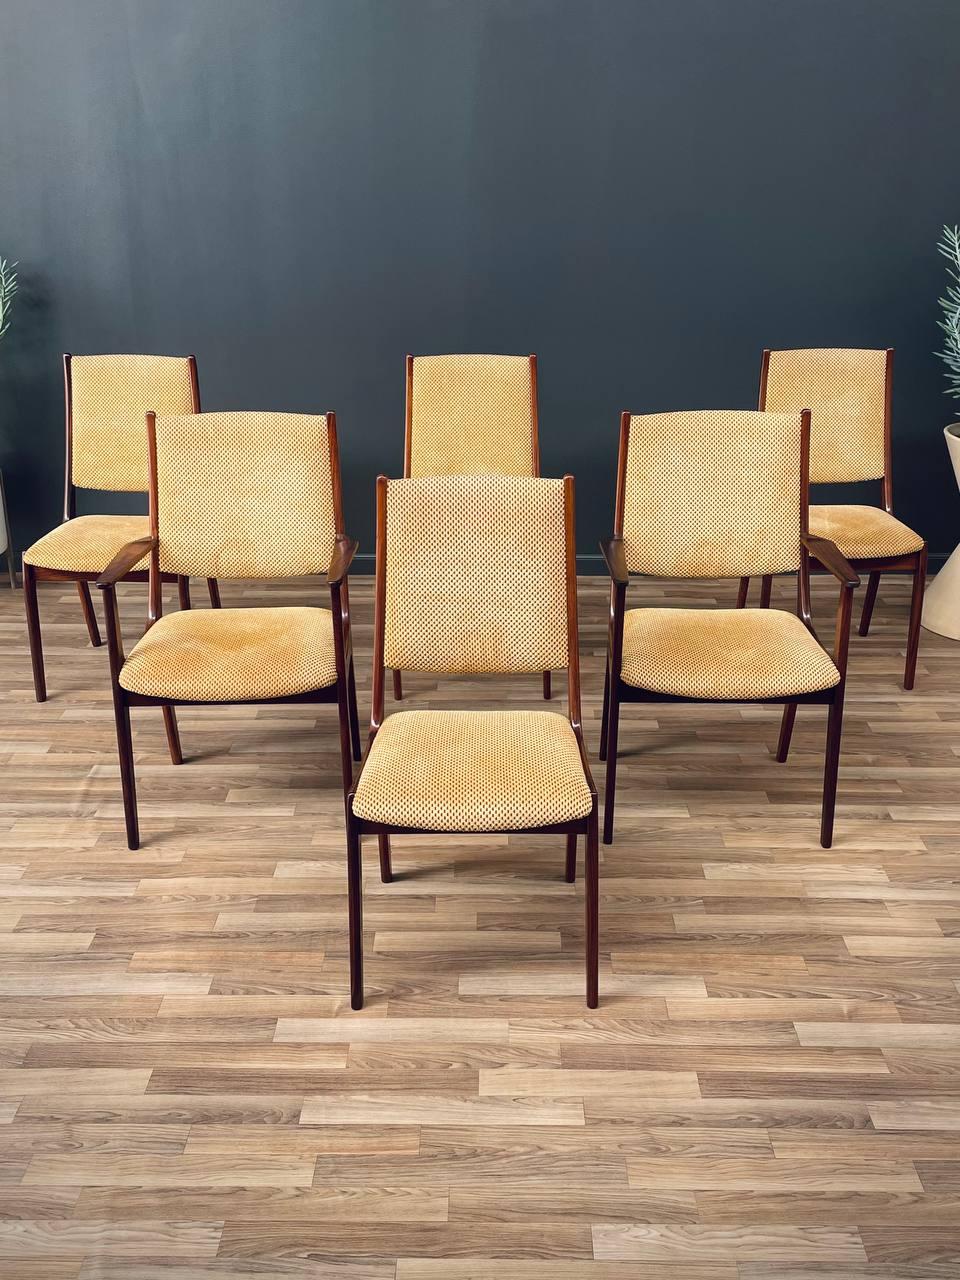 Original Vintage Condition

Side Chairs:
37.50